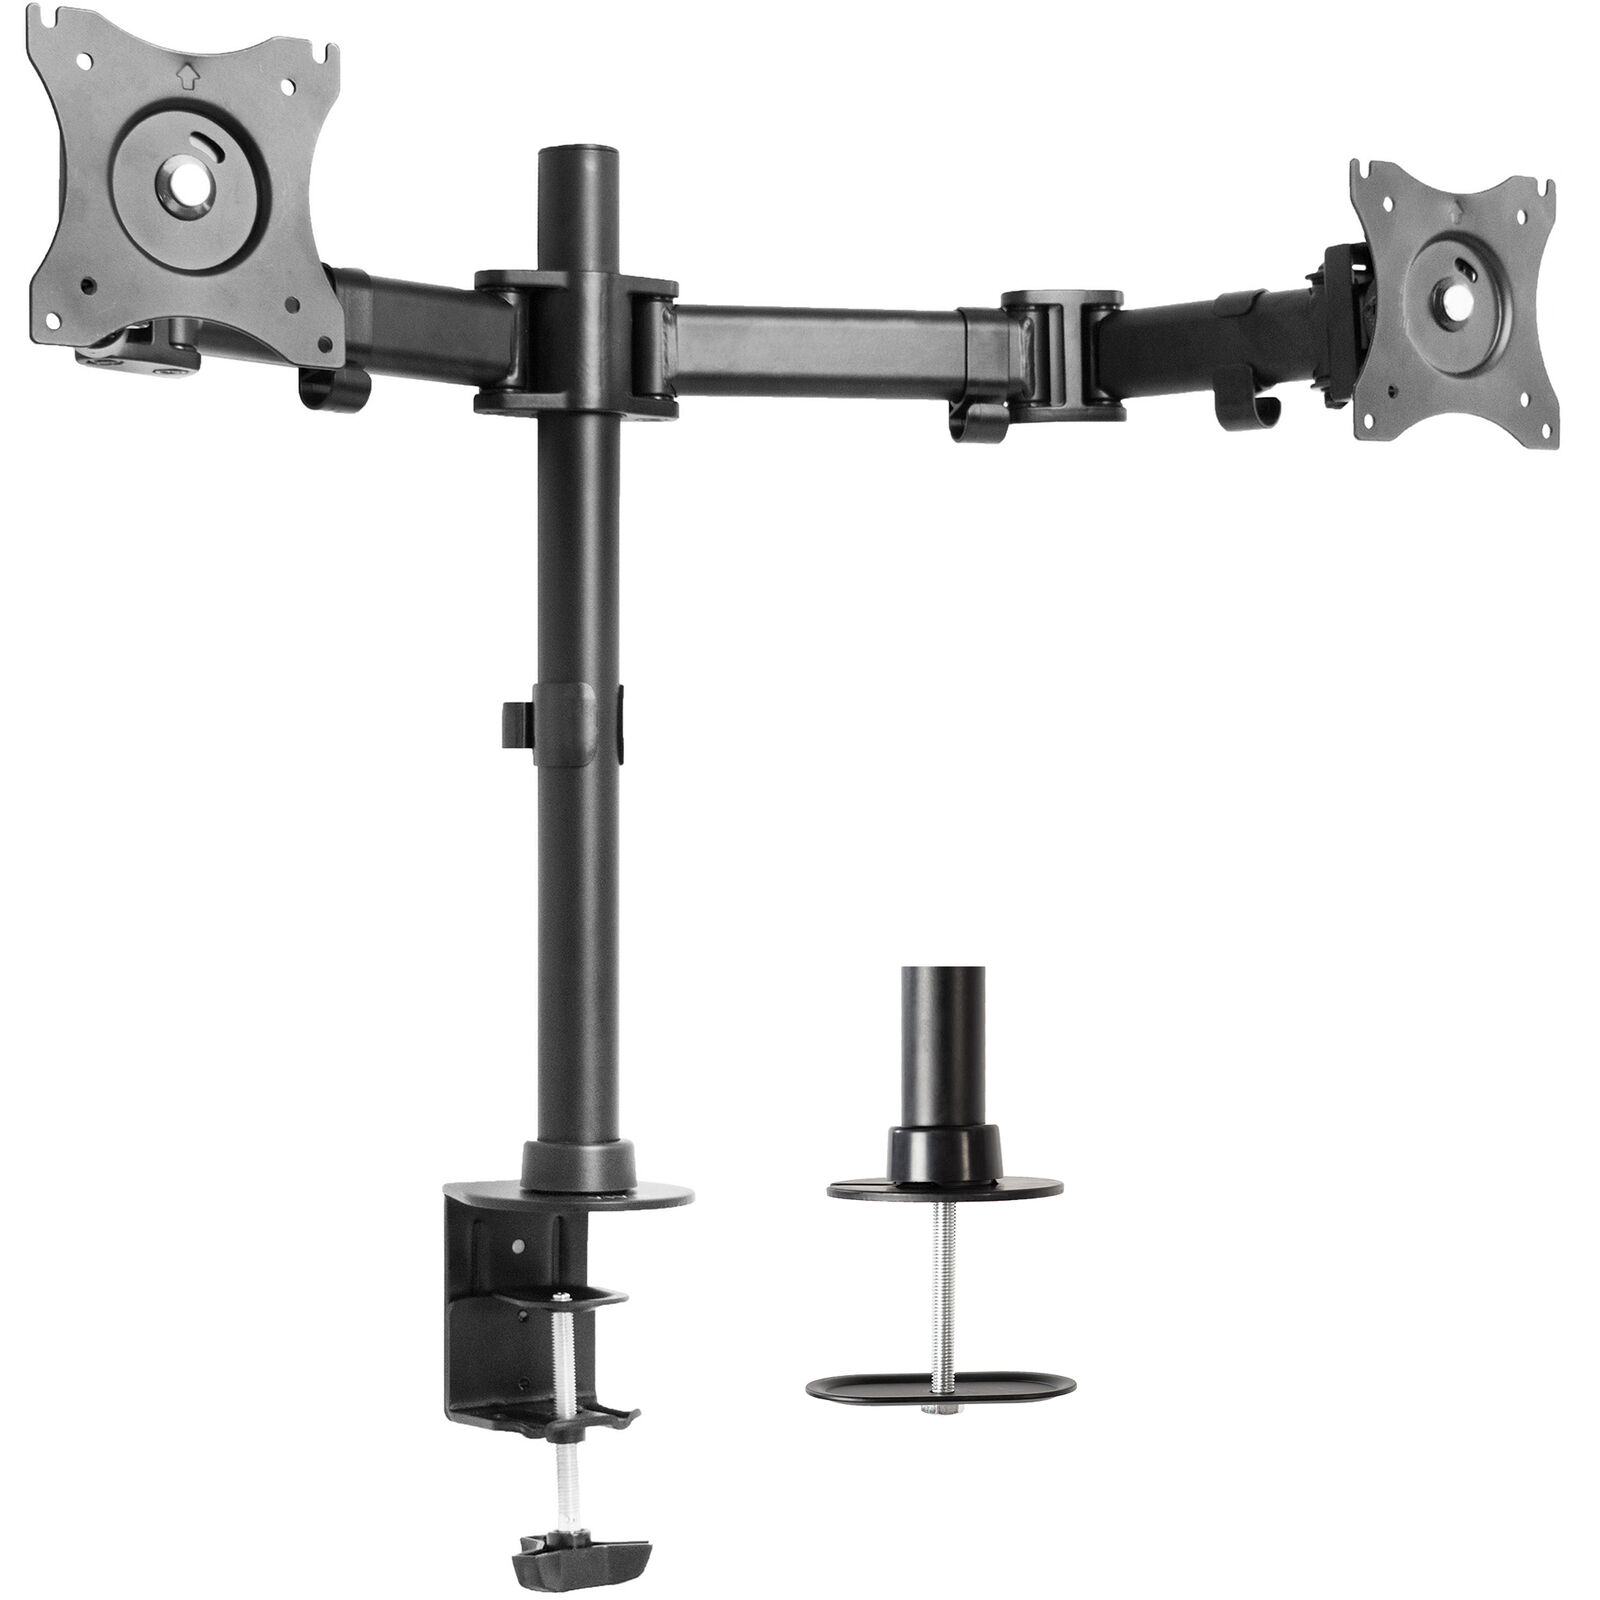 VIVO Dual Monitor Arms Fully Adjustable Desk Mount Stand fits 2 Screens upto 27\